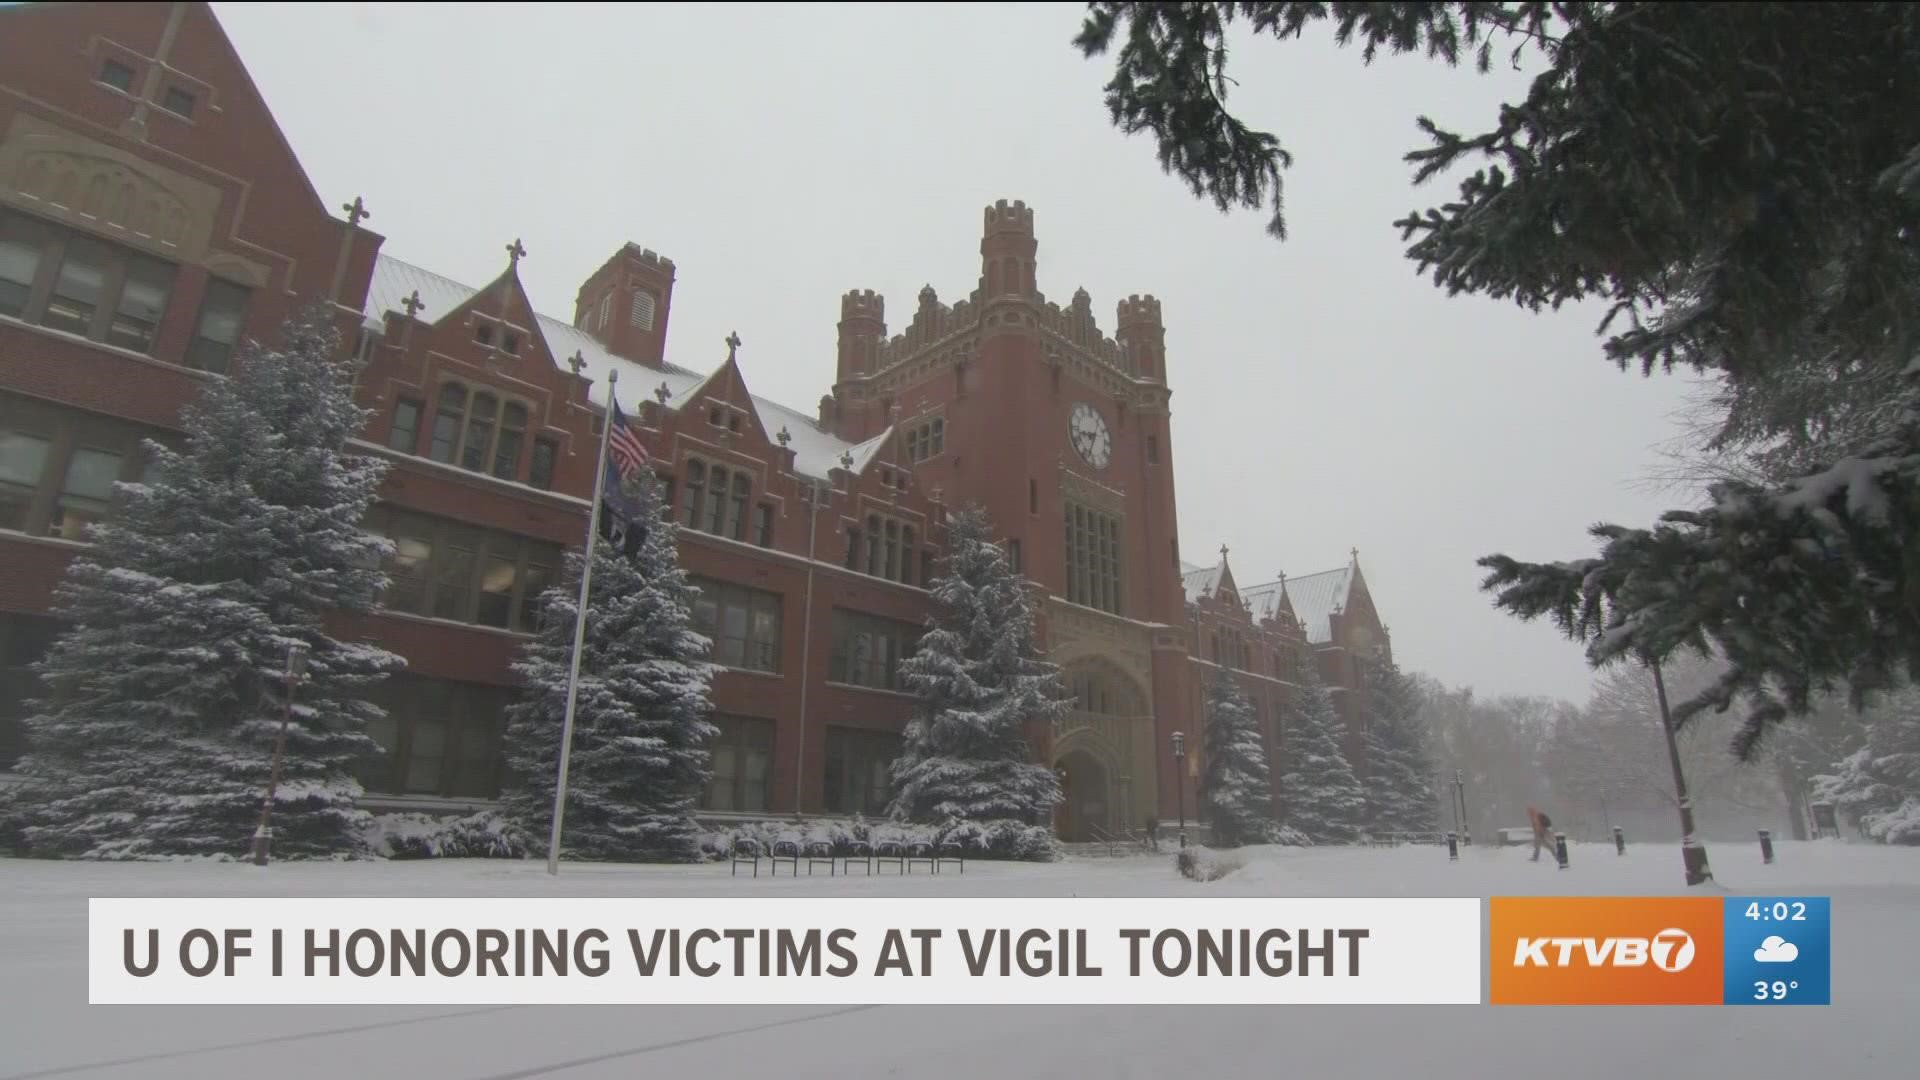 The candlelight vigil will be held at the University of Idaho in Moscow on Wednesday, Nov. 30 at 5 p.m. PT/6 p.m. MT.